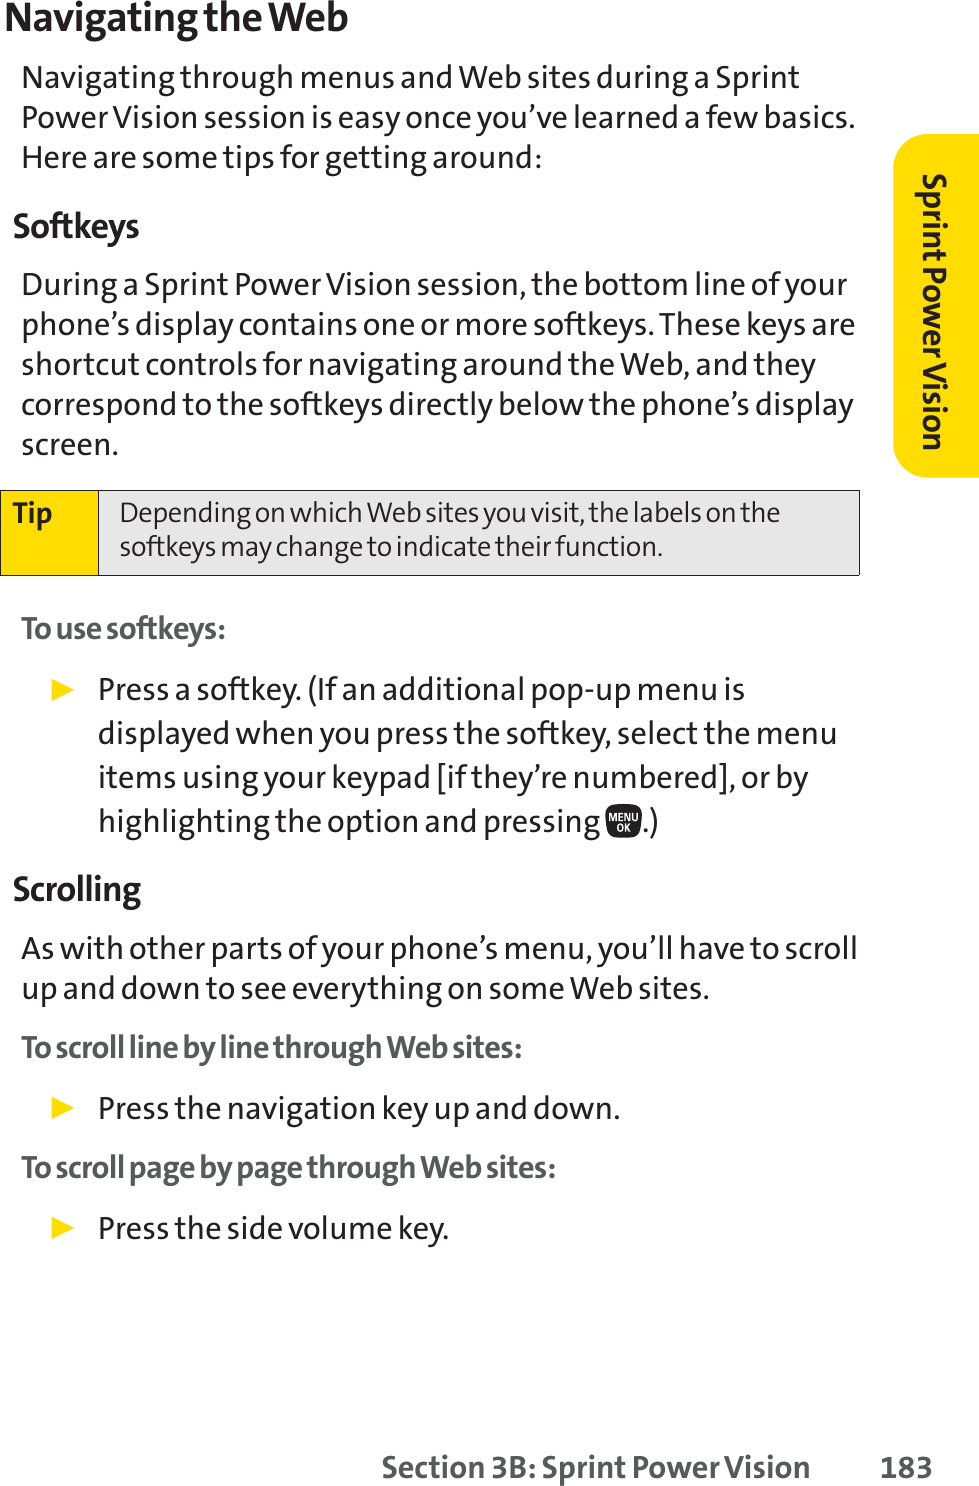 Section 3B: Sprint Power Vision 183Navigating the WebNavigating through menus and Web sites during a SprintPower Vision session is easy once you’ve learned a few basics.Here are some tips for getting around:SoftkeysDuring a Sprint Power Vision session, the bottom line of yourphone’s display contains one or more softkeys. These keys areshortcut controls for navigating around the Web, and theycorrespond to the softkeys directly below the phone’s displayscreen. To use softkeys:䊳Press a softkey. (If an additional pop-up menu isdisplayed when you press the softkey, select the menuitems using your keypad [if they’re numbered], or byhighlighting the option and pressing  .)ScrollingAs with other parts of your phone’s menu, you’ll have to scrollup and down to see everything on some Web sites.To scroll line by line through Web sites:䊳Press the navigation key up and down.To scroll page by page through Web sites:䊳Press the side volume key.Tip Depending on which Web sites you visit, the labels on thesoftkeys may change to indicate their function.Sprint PowerVision